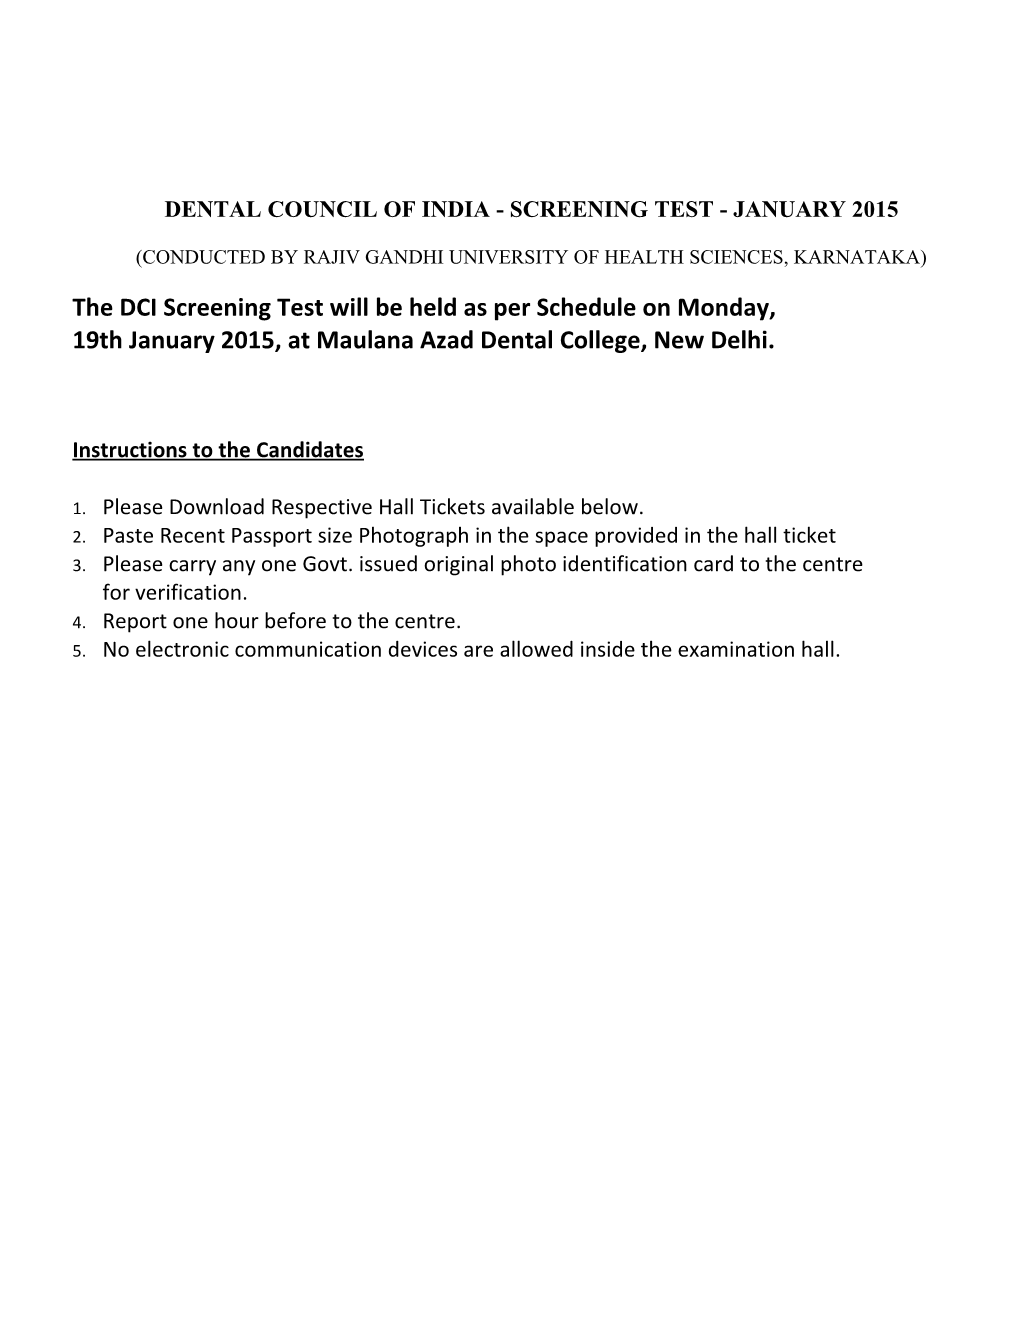 Dental Council of India - Screening Test - January 2015